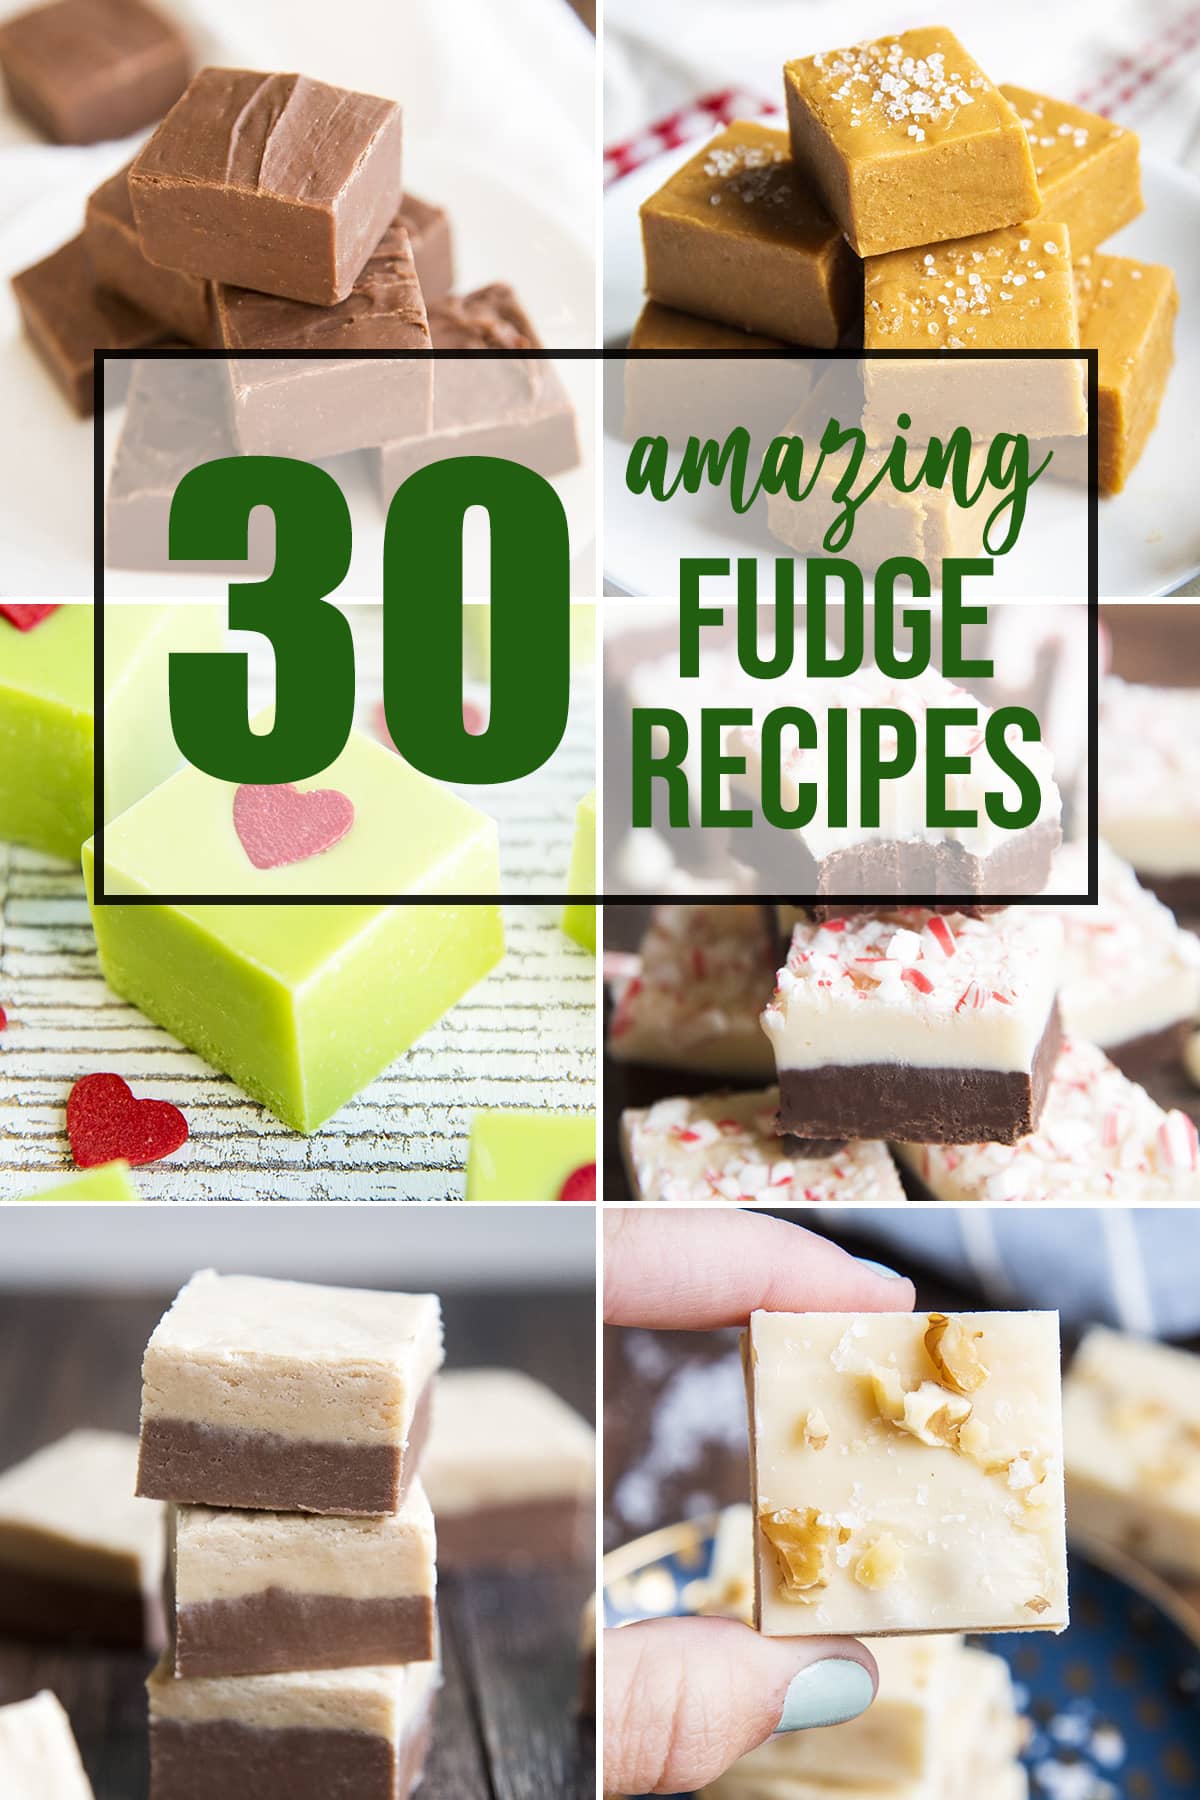 A collage of 6 photos of different types of fudge.